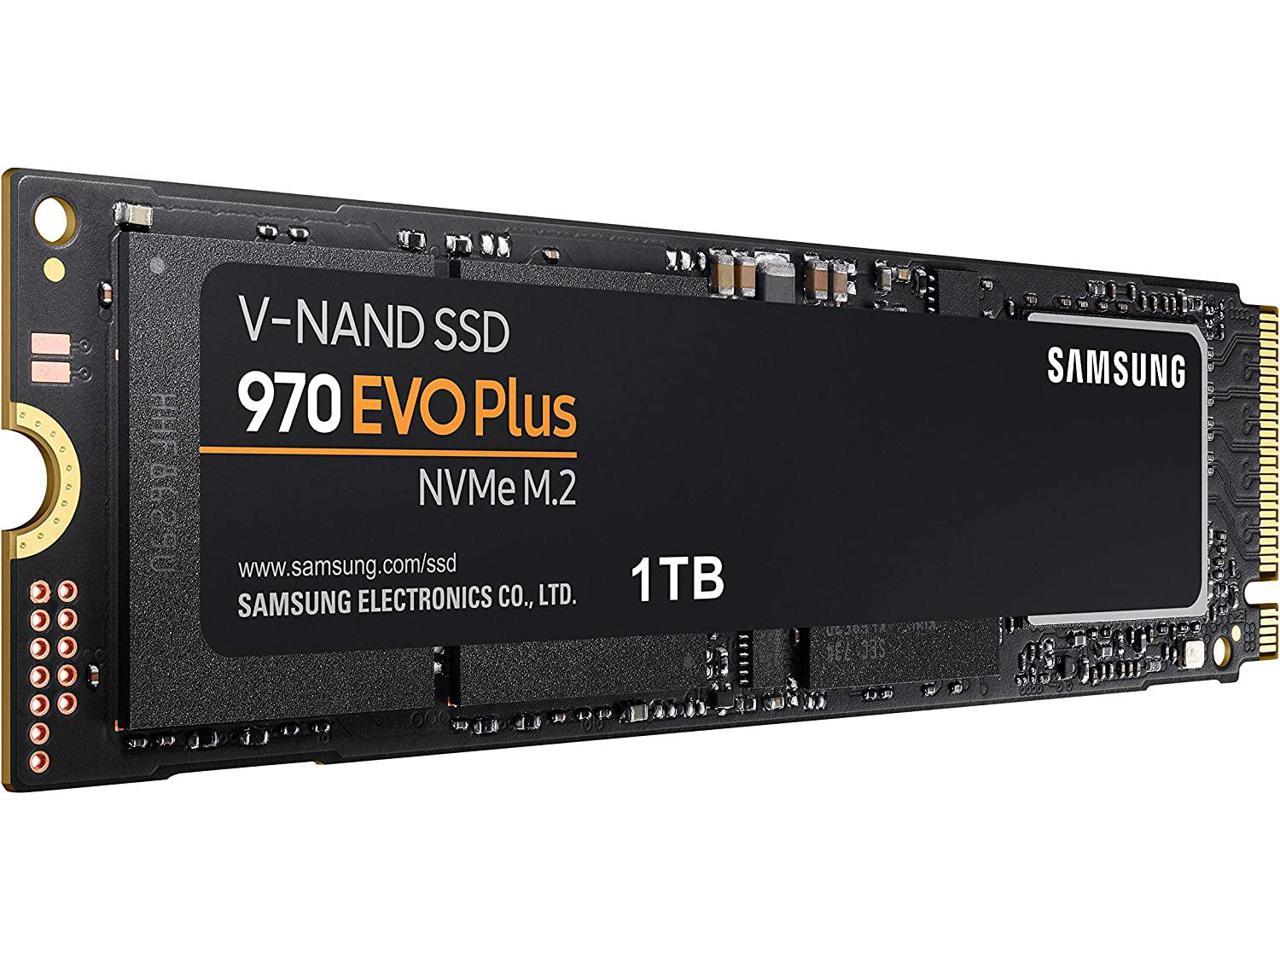 SAMSUNG 970 EVO Plus SSD 1TB, M.2 NVMe Interface Internal Solid State Hard with V-NAND Technology for Gaming, Graphic Design - Newegg.com